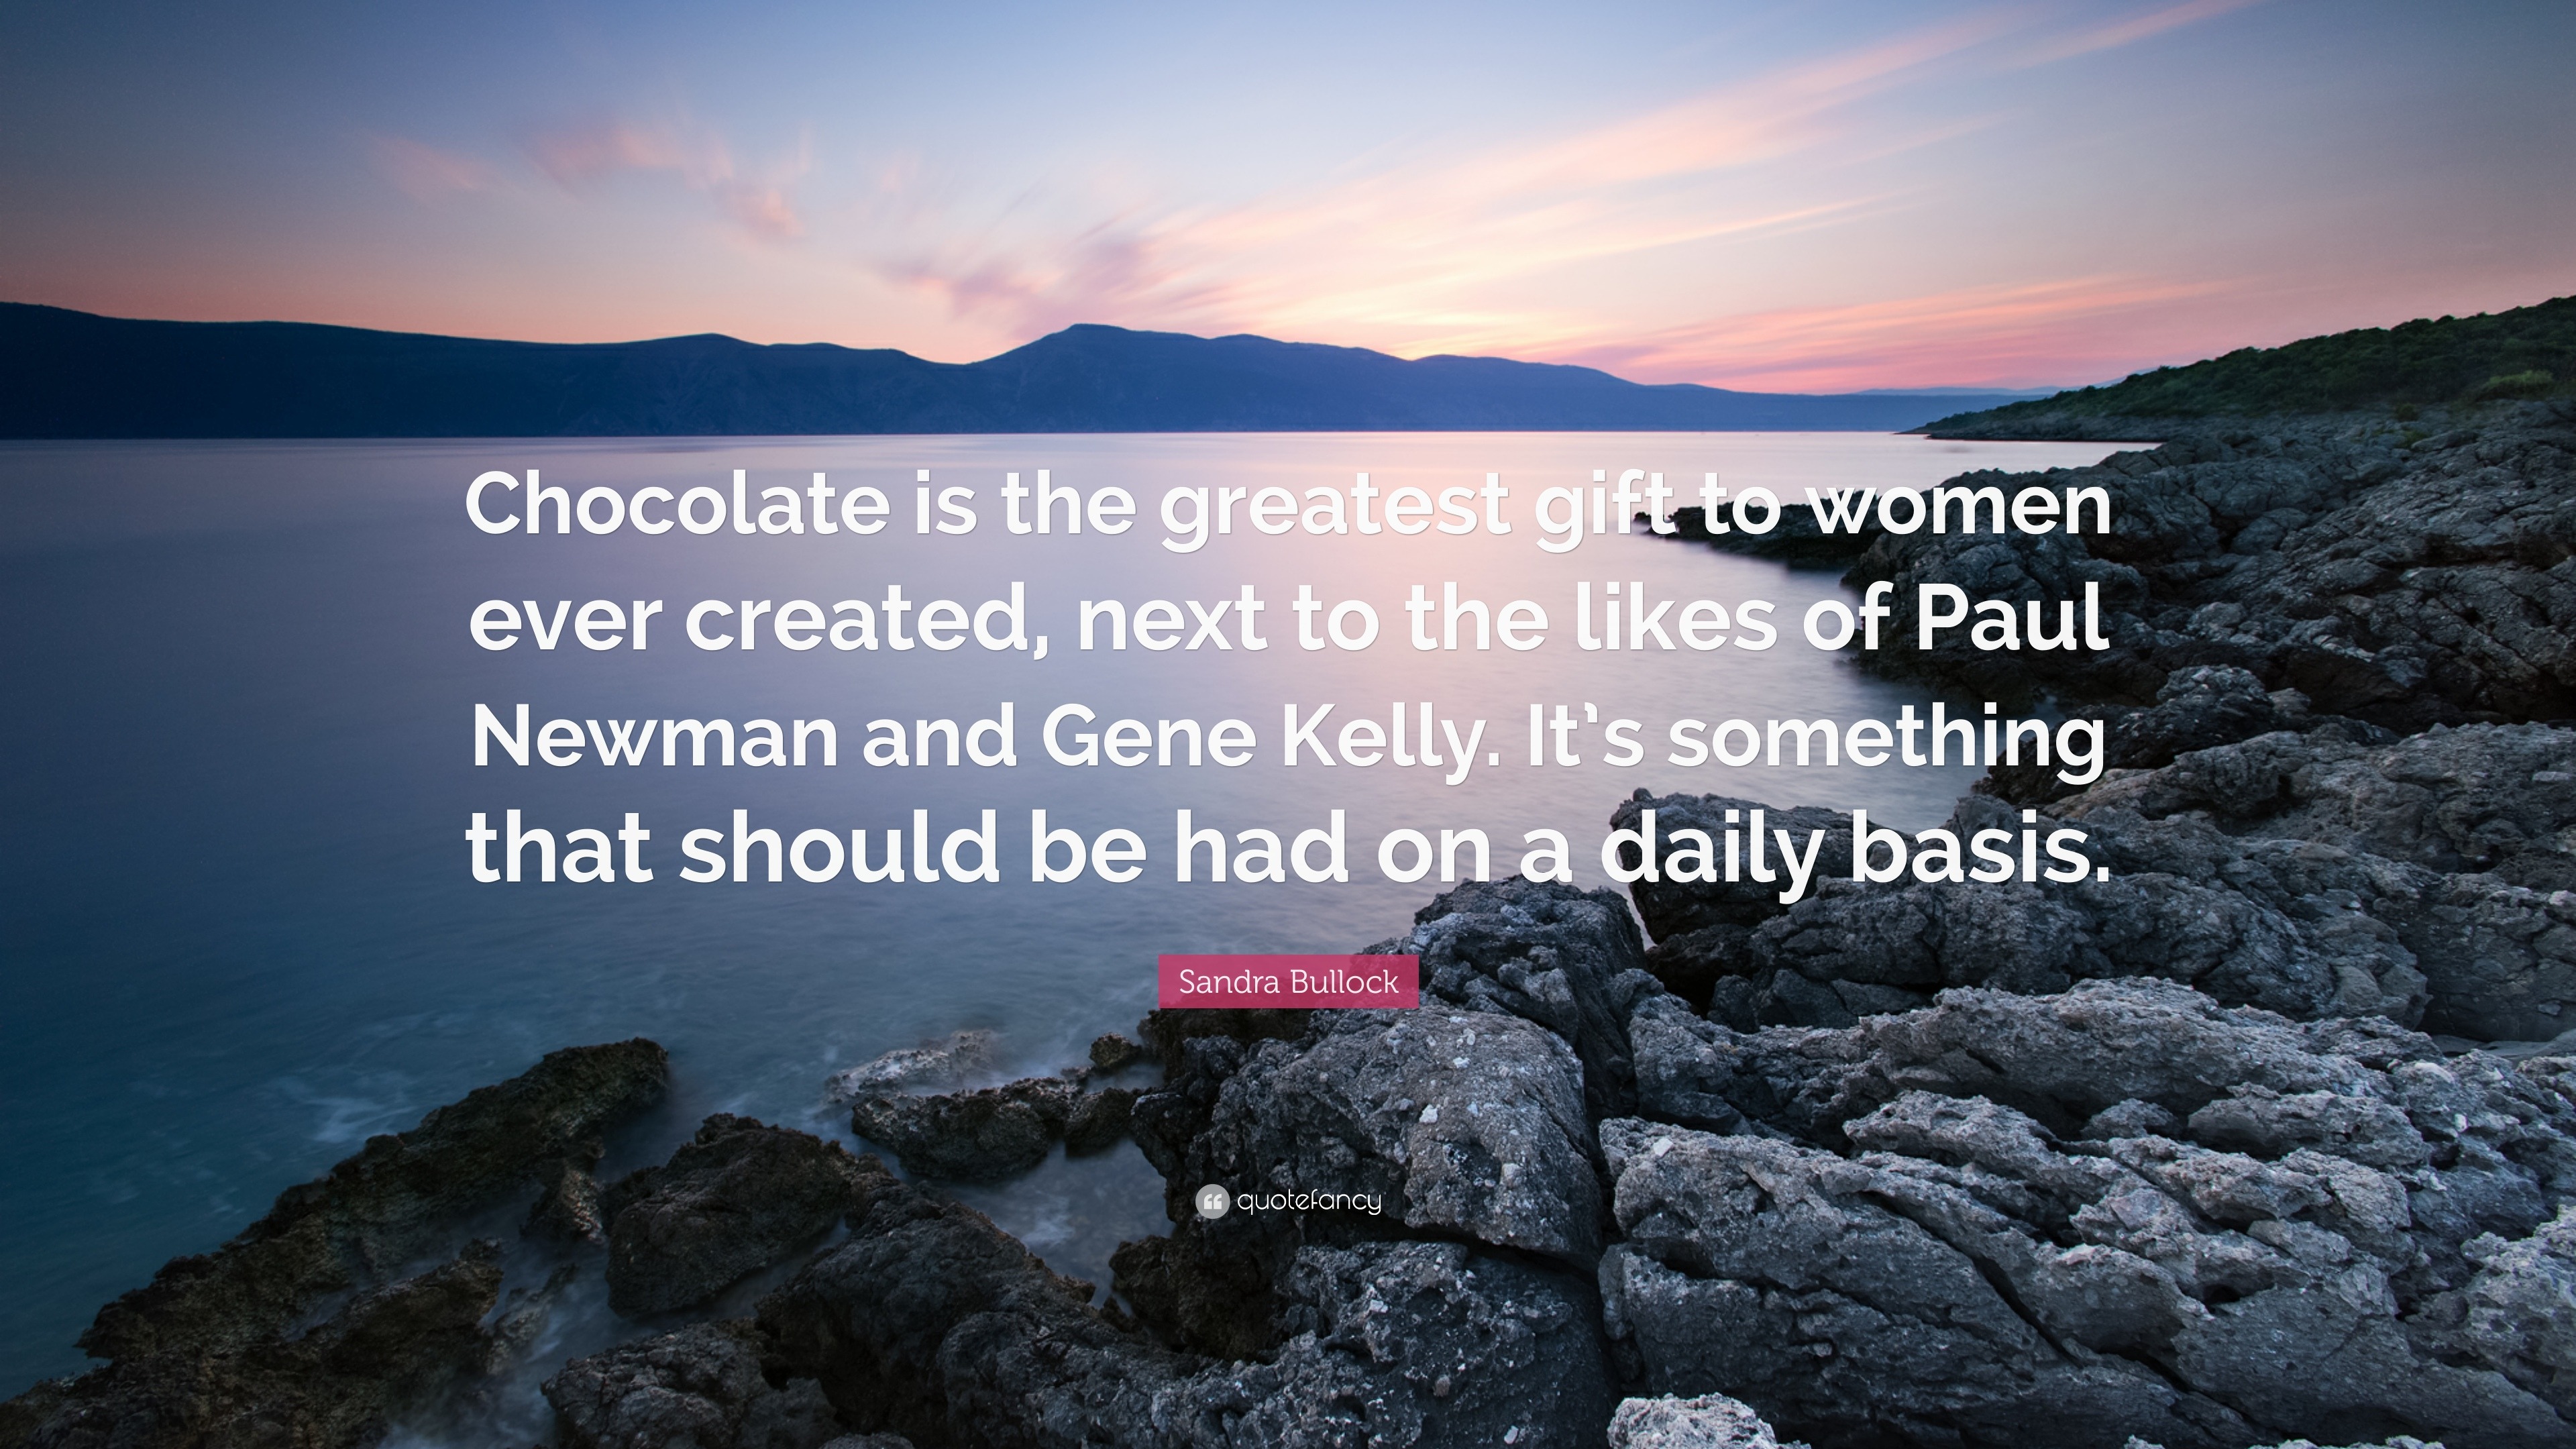 589284 Sandra Bullock Quote Chocolate is the greatest gift to women ever